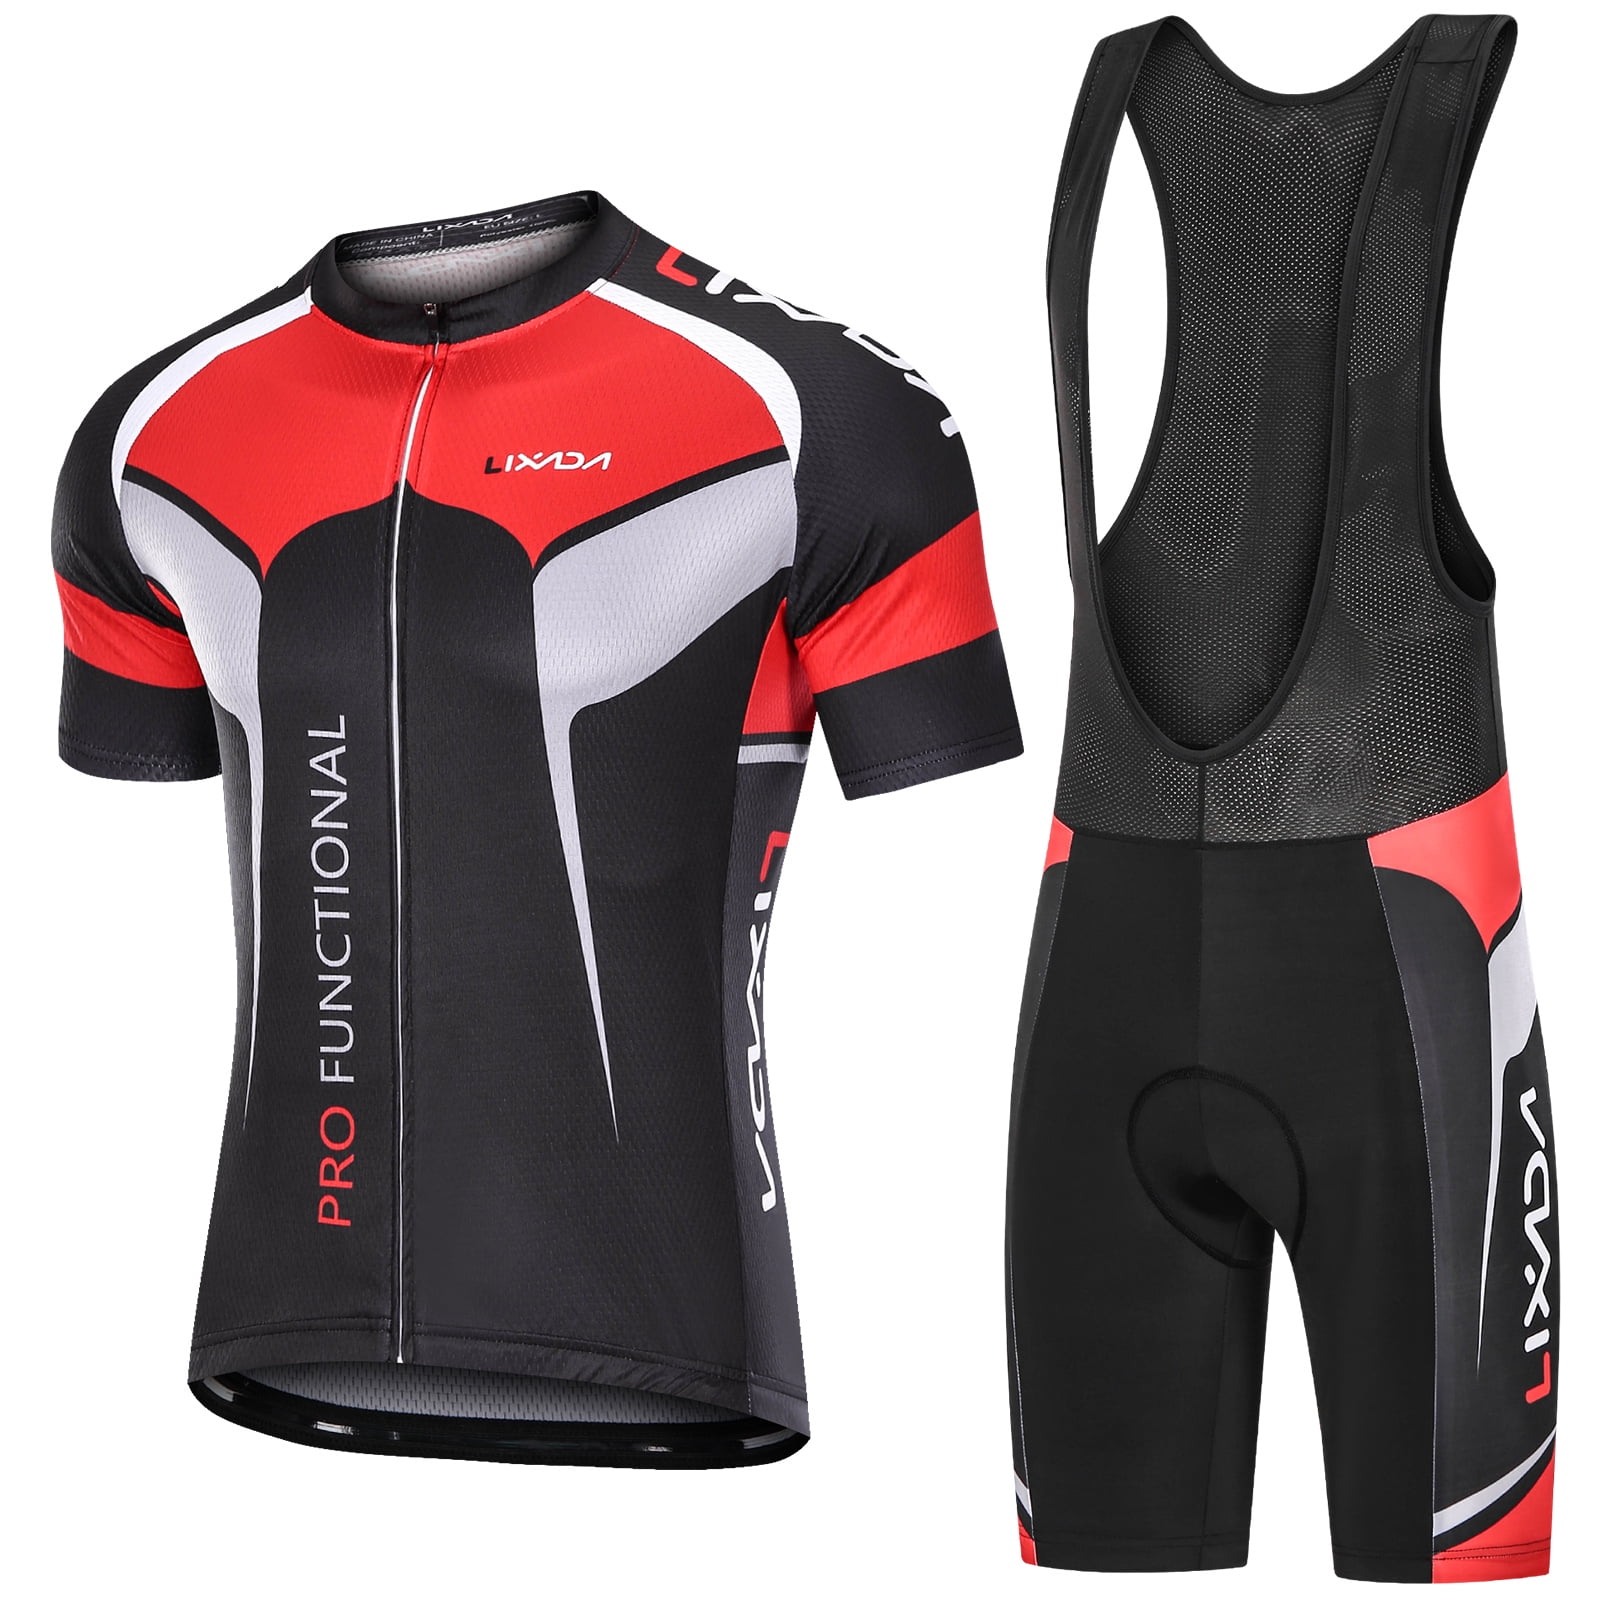 Details about   Mens Team Cycling Jersey Bib Shorts Set Breathable Short Sleeve Bicycle Uniform 